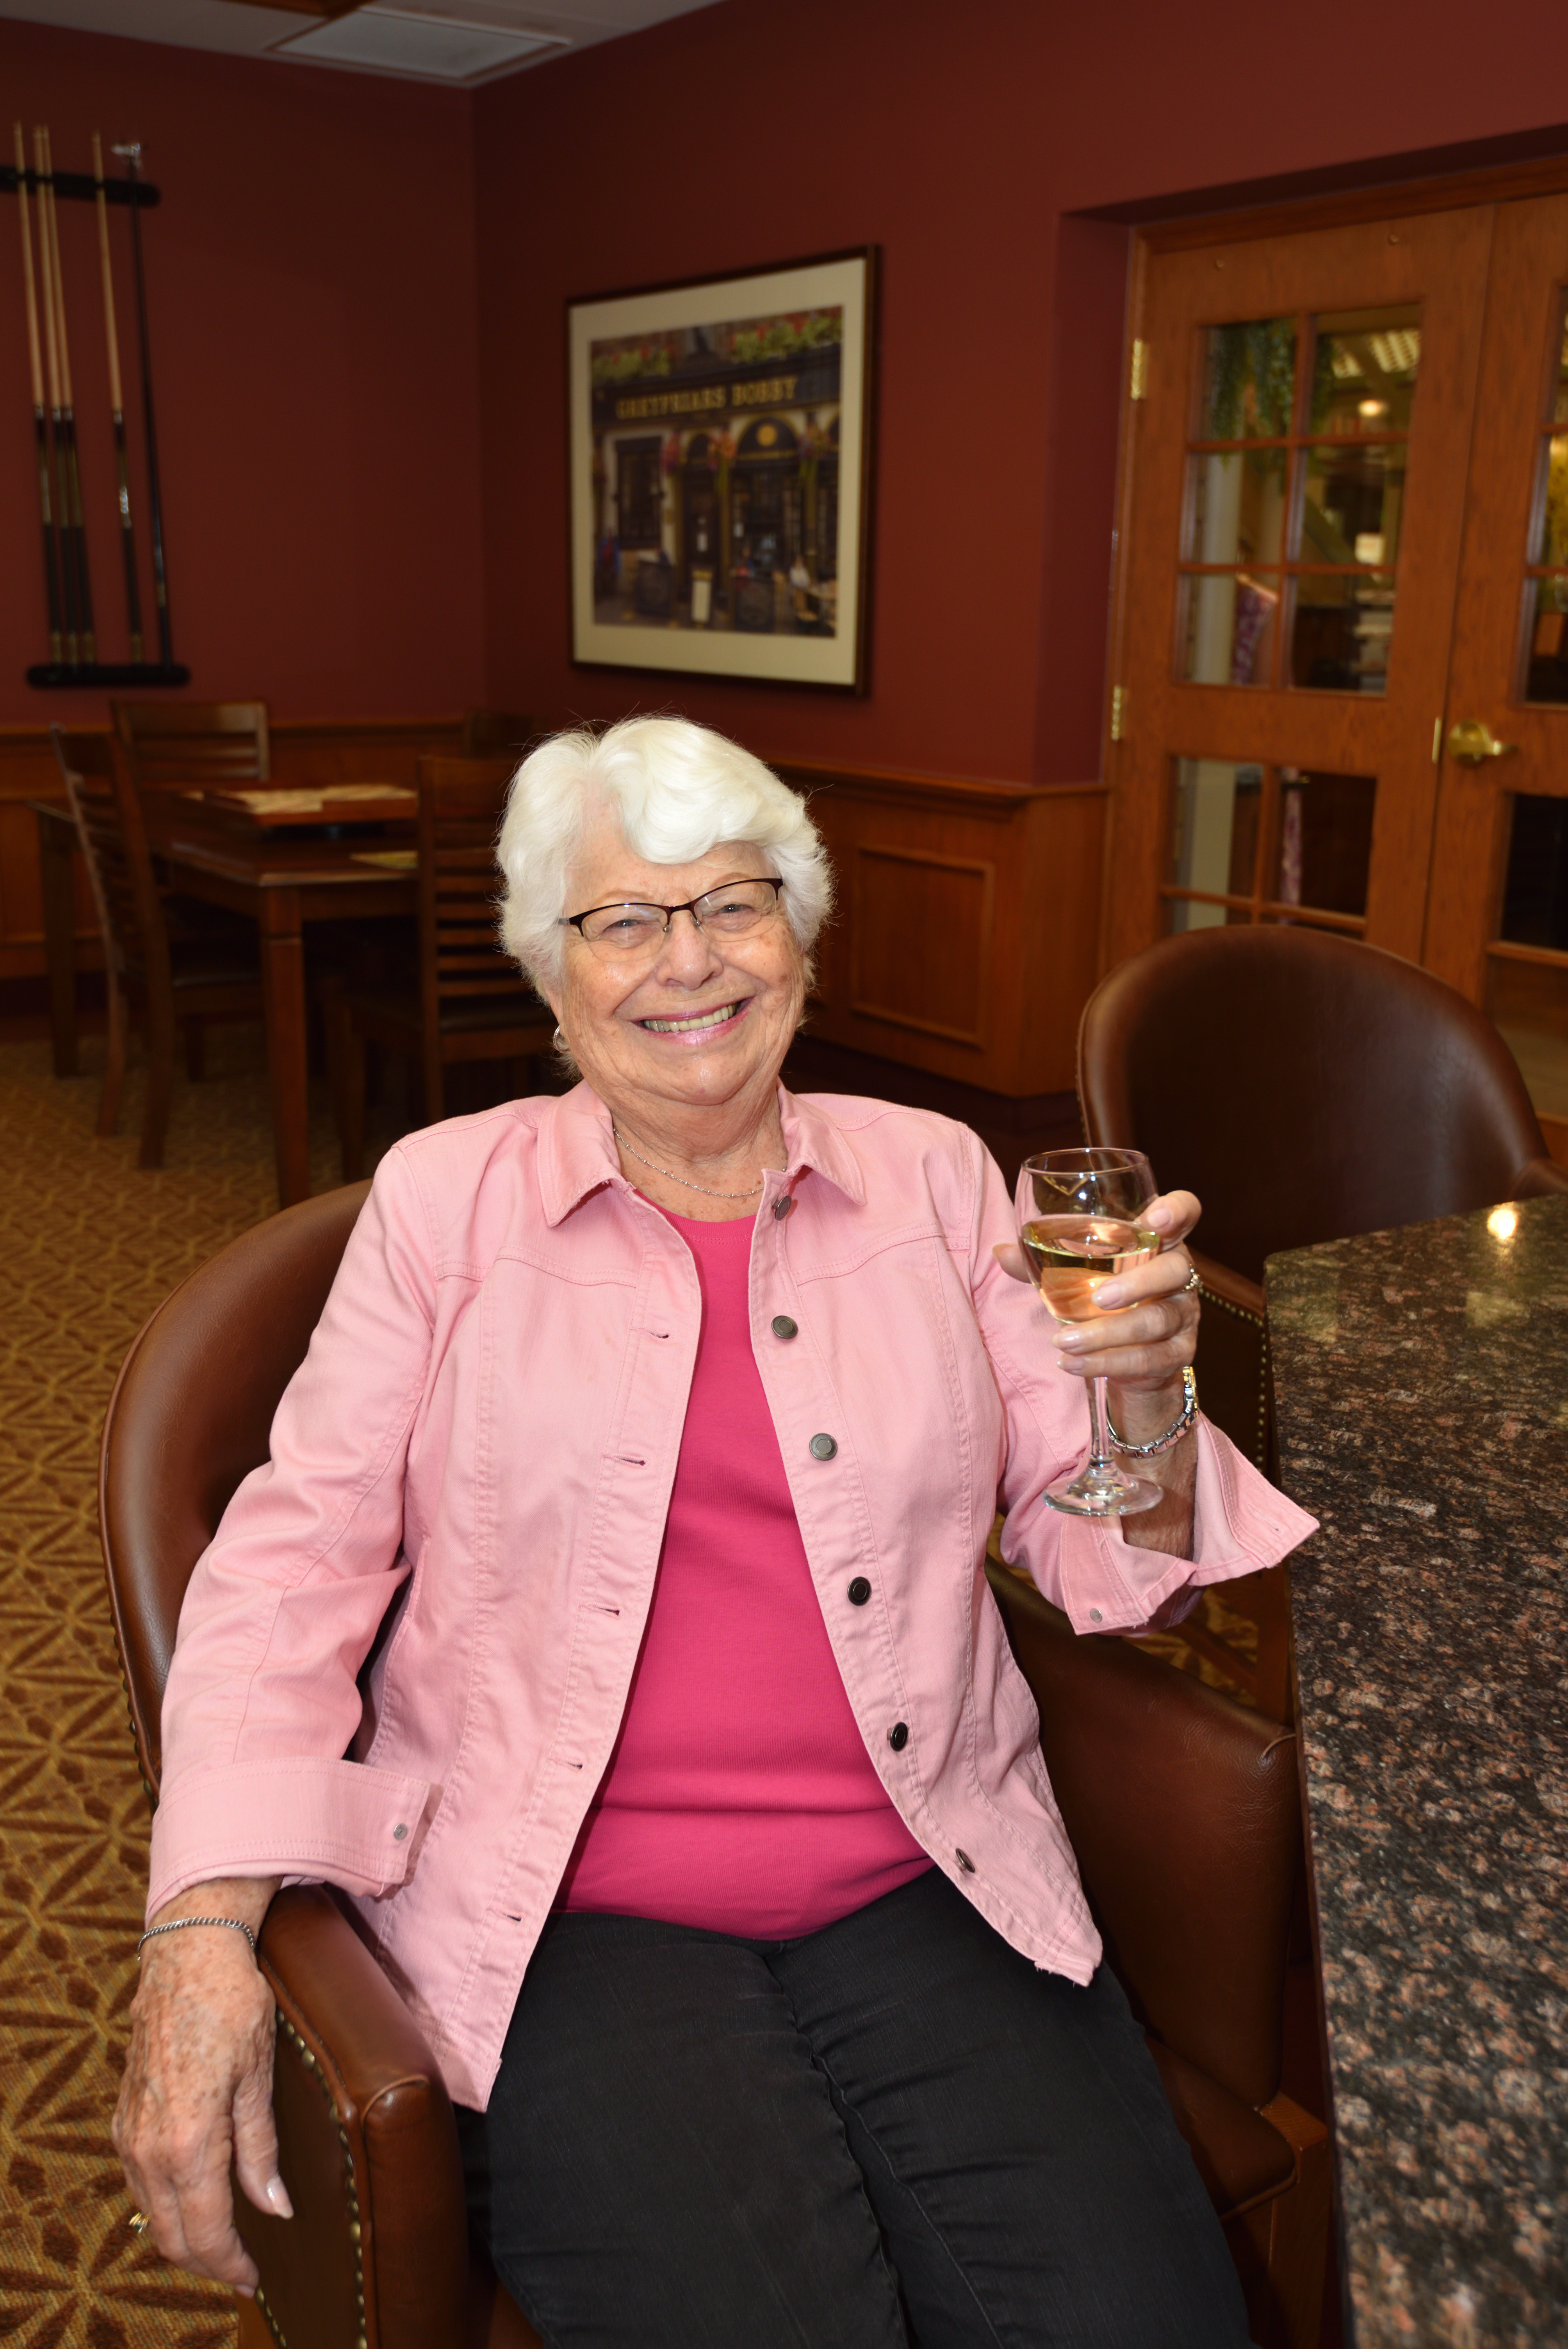 Resident drinking a glass of wine at happy hour in the Social Club